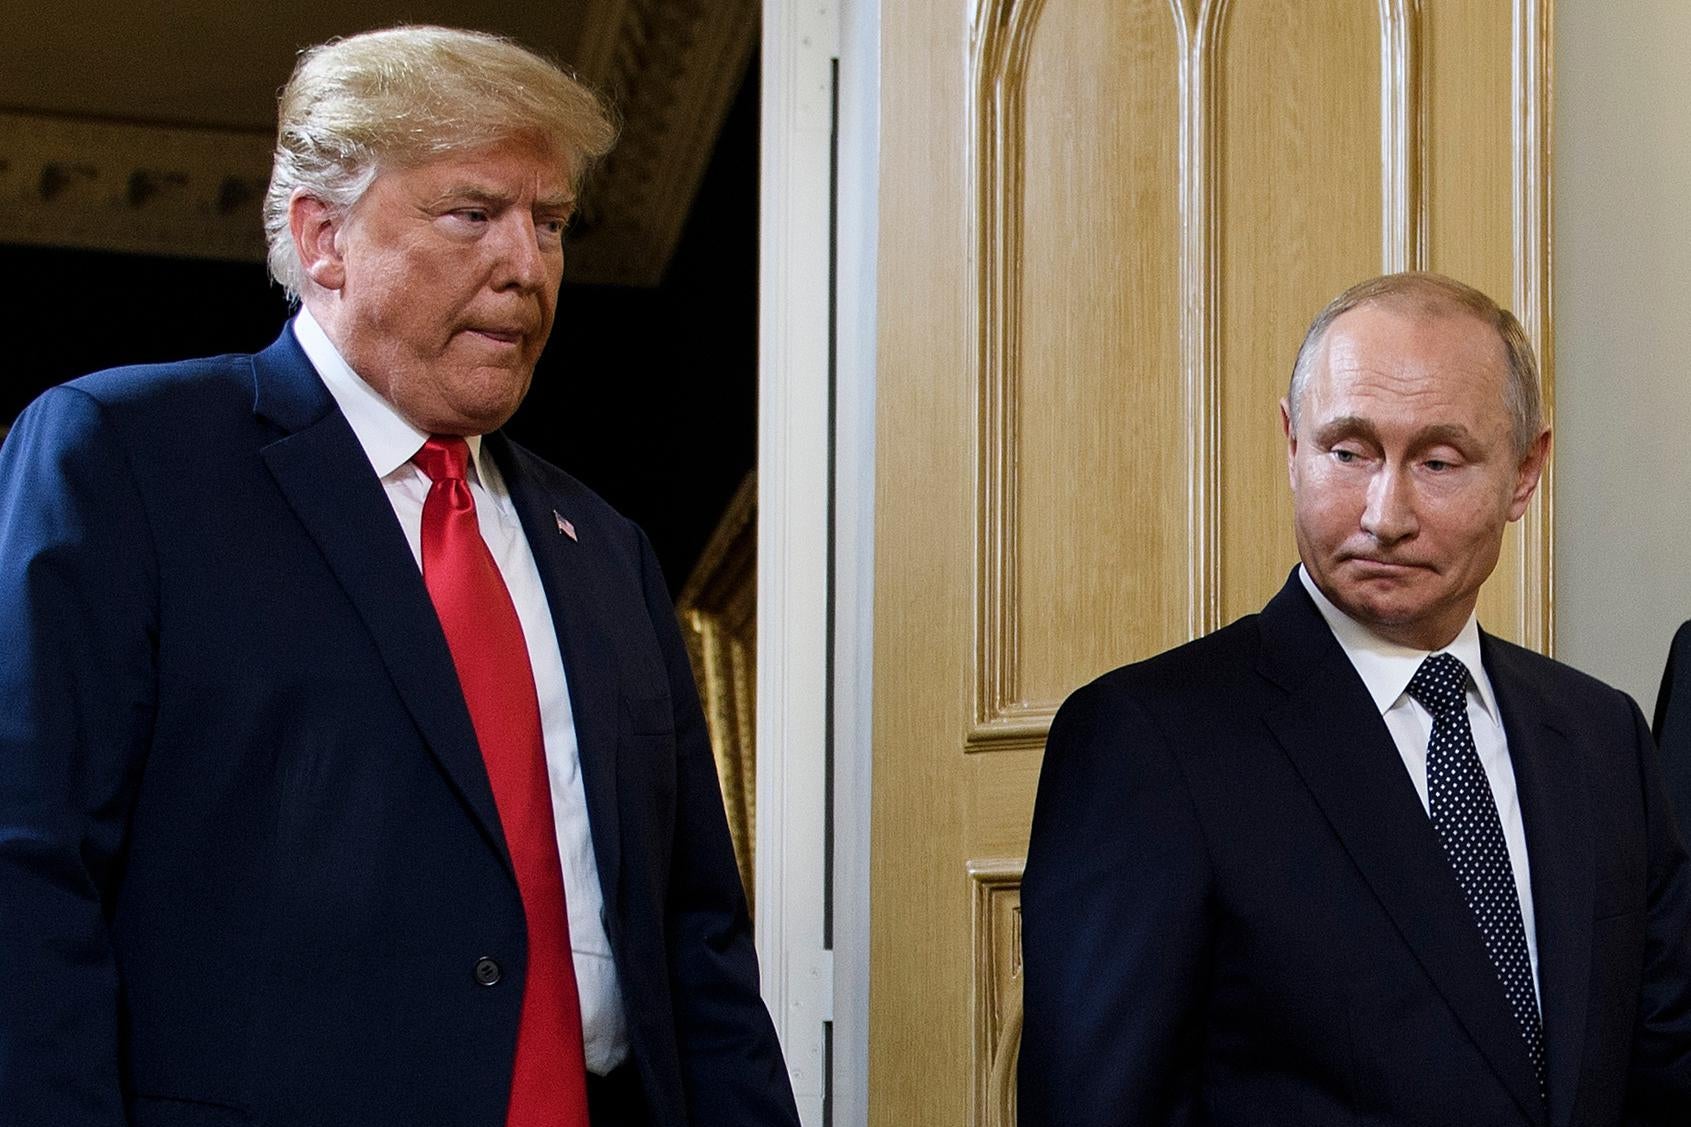 Donald Trump and Vladimir Putin stand beside each other.